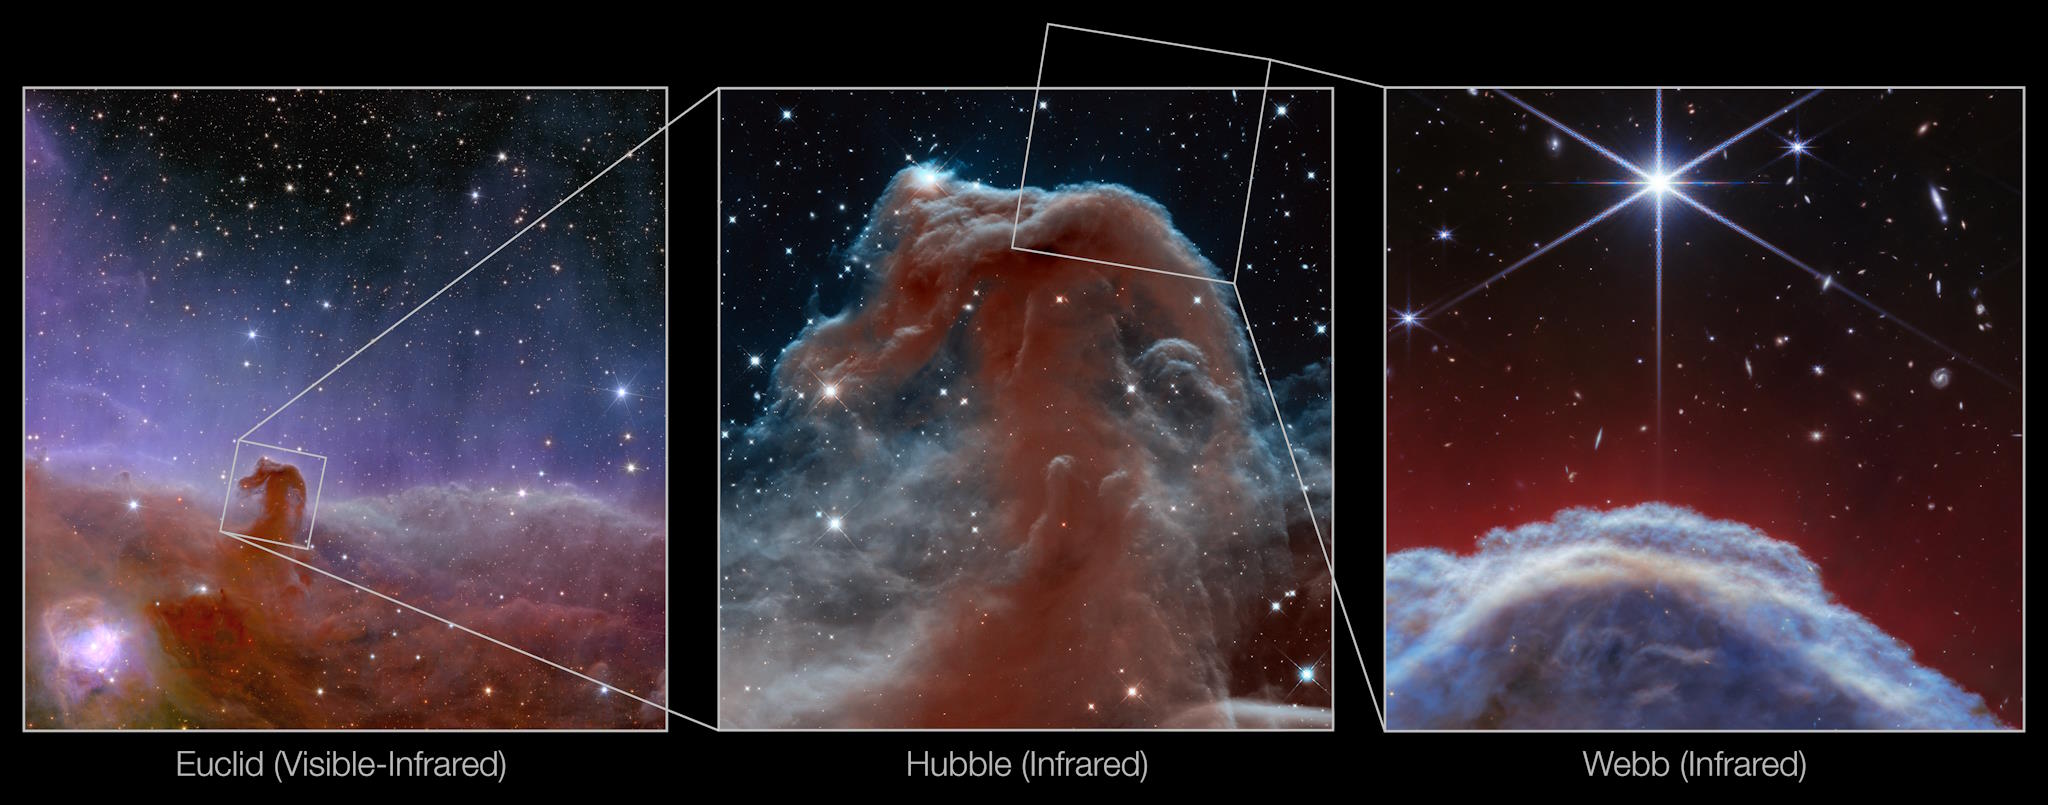 Three panels comparing nebula images from Euclid (visible-infrared), Hubble (infrared), and JWST (infrared) telescopes, highlighting detailed astronomical observations of the Horsehead Nebula